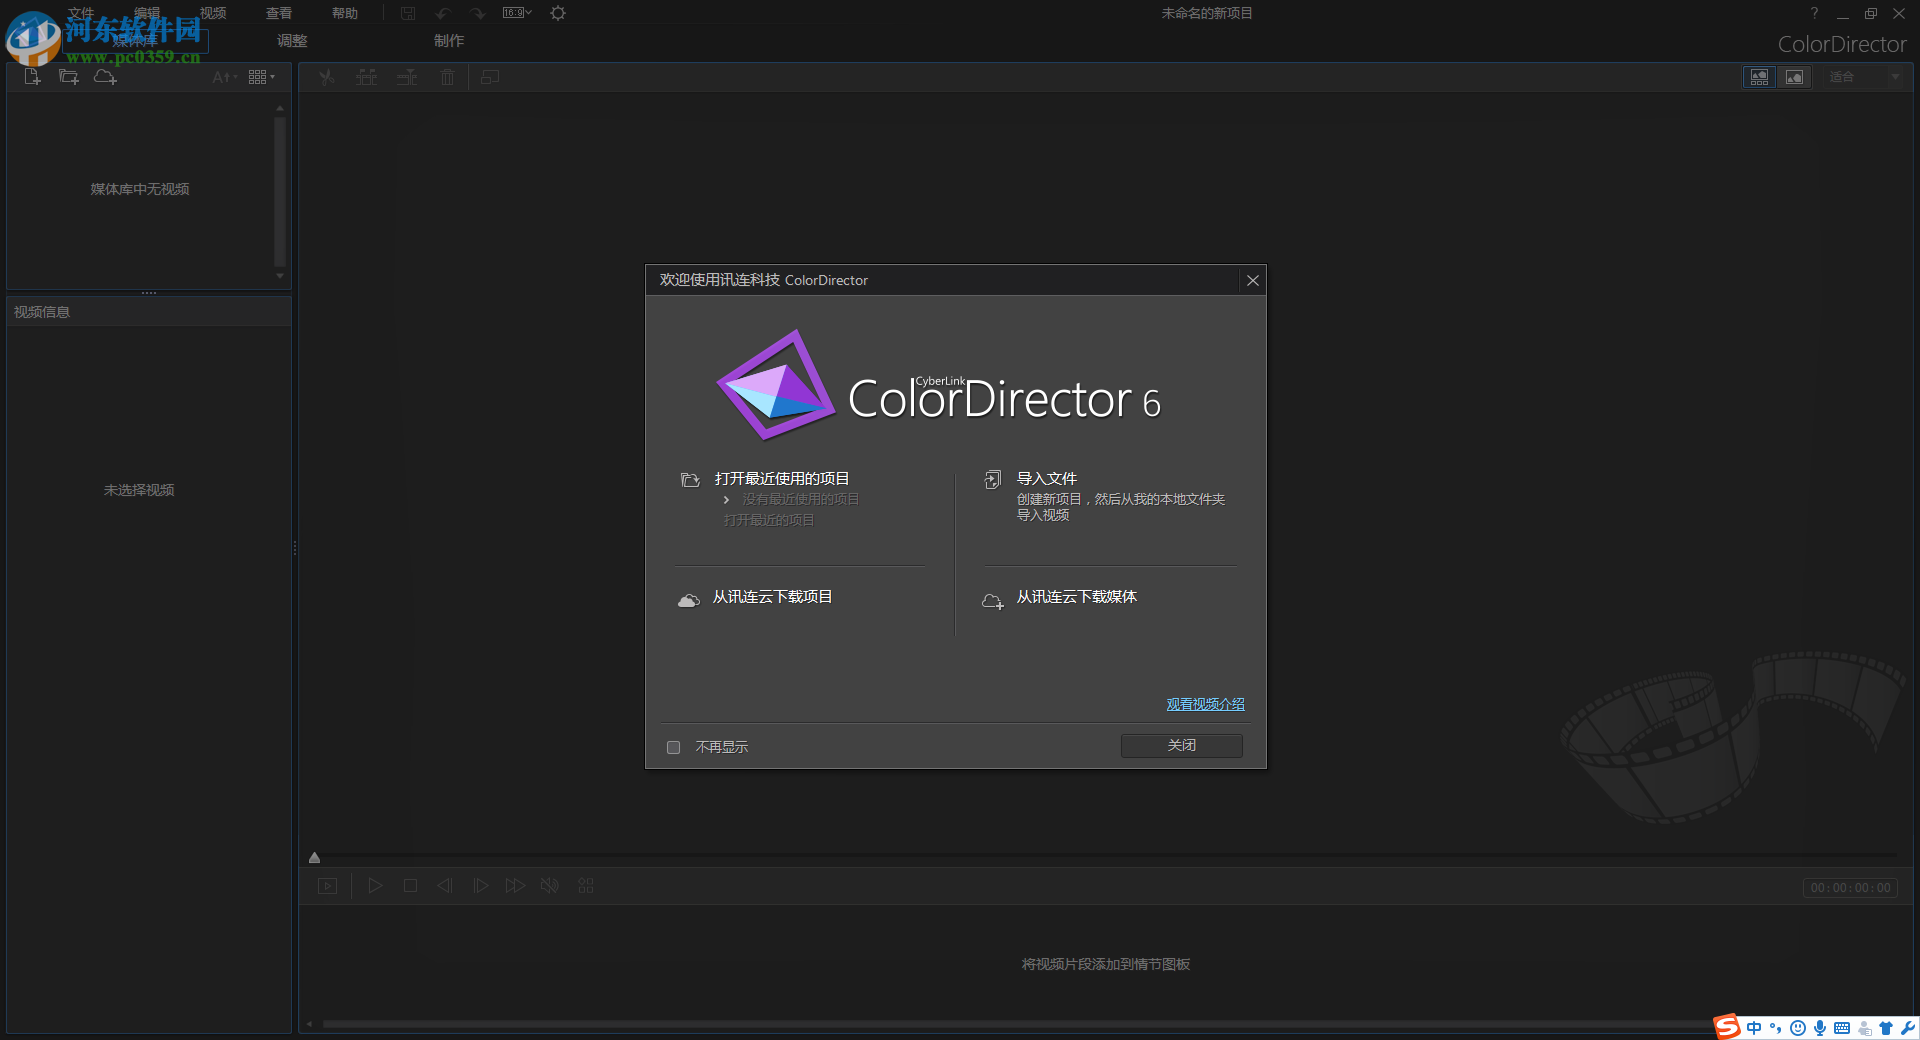 ColorDirector 8İ